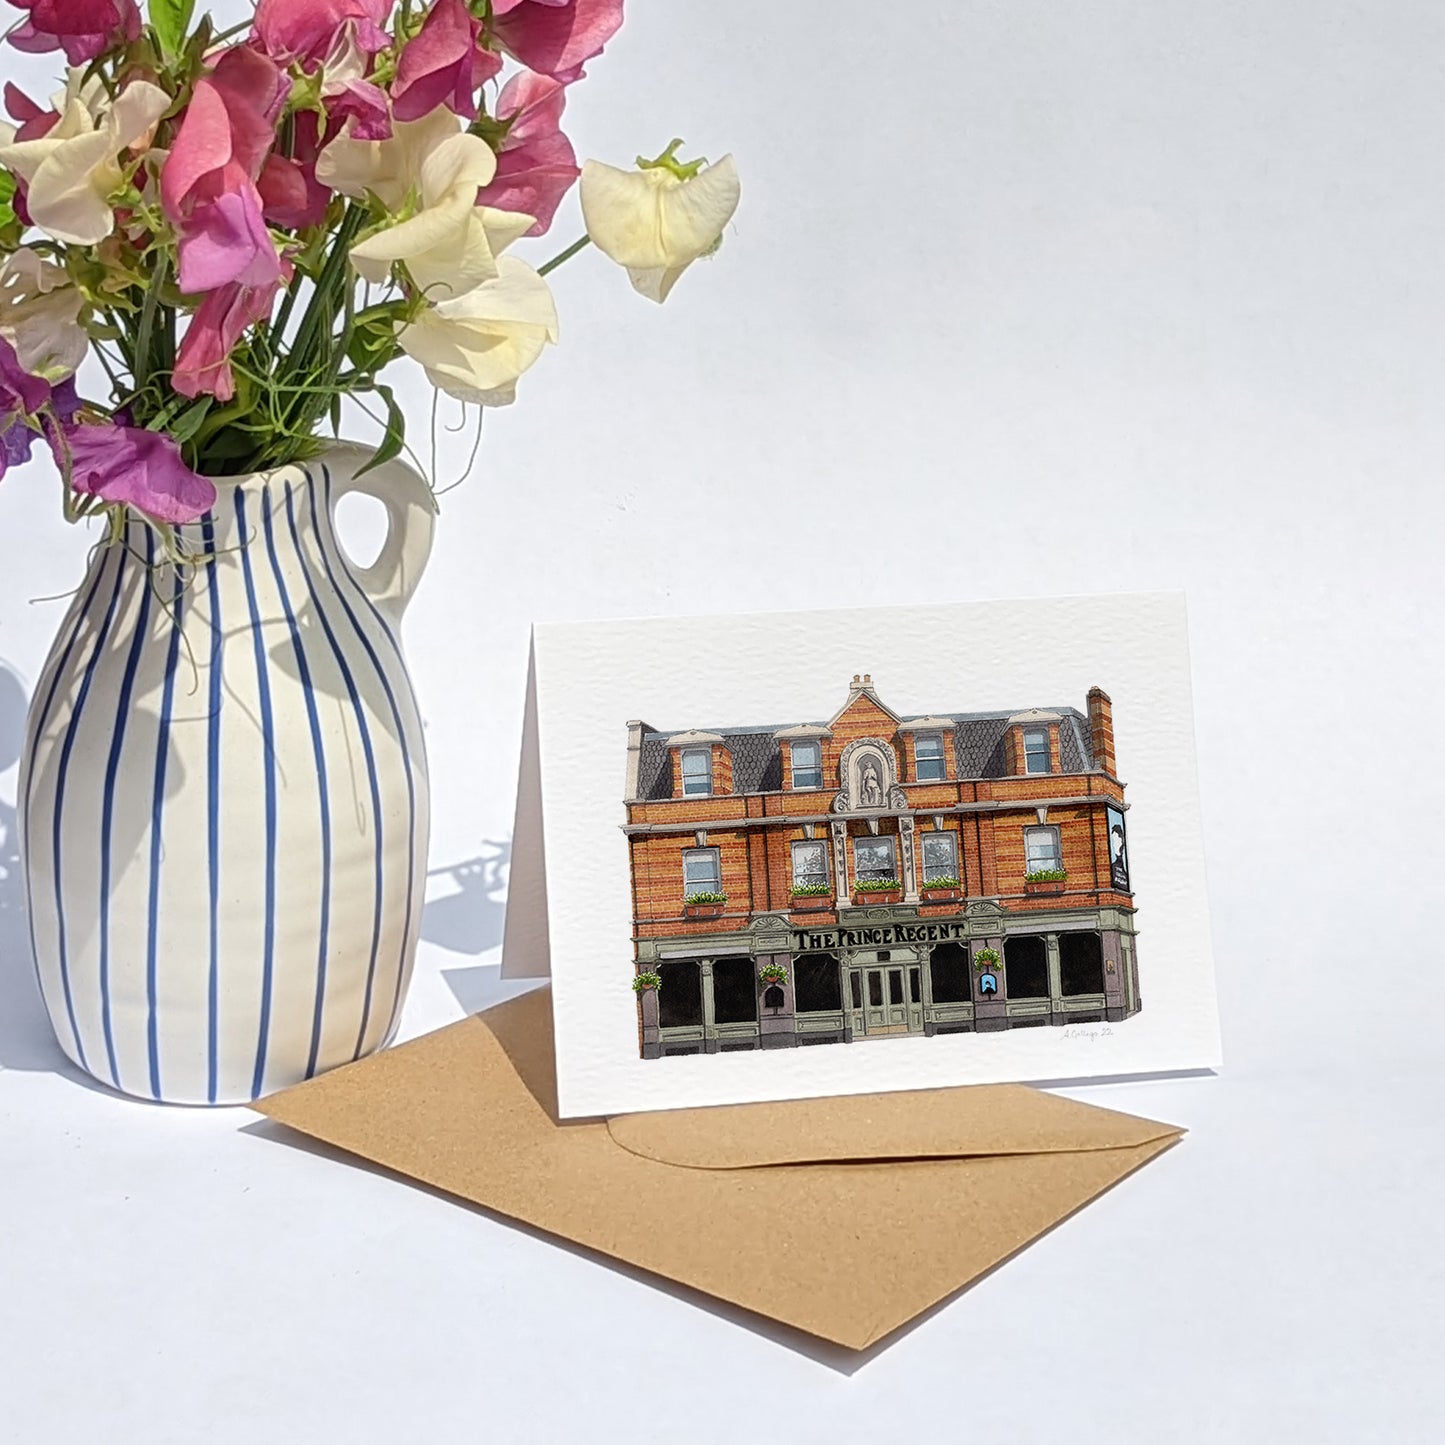 Herne Hill - The Prince Regent pub - Greeting card with envelope